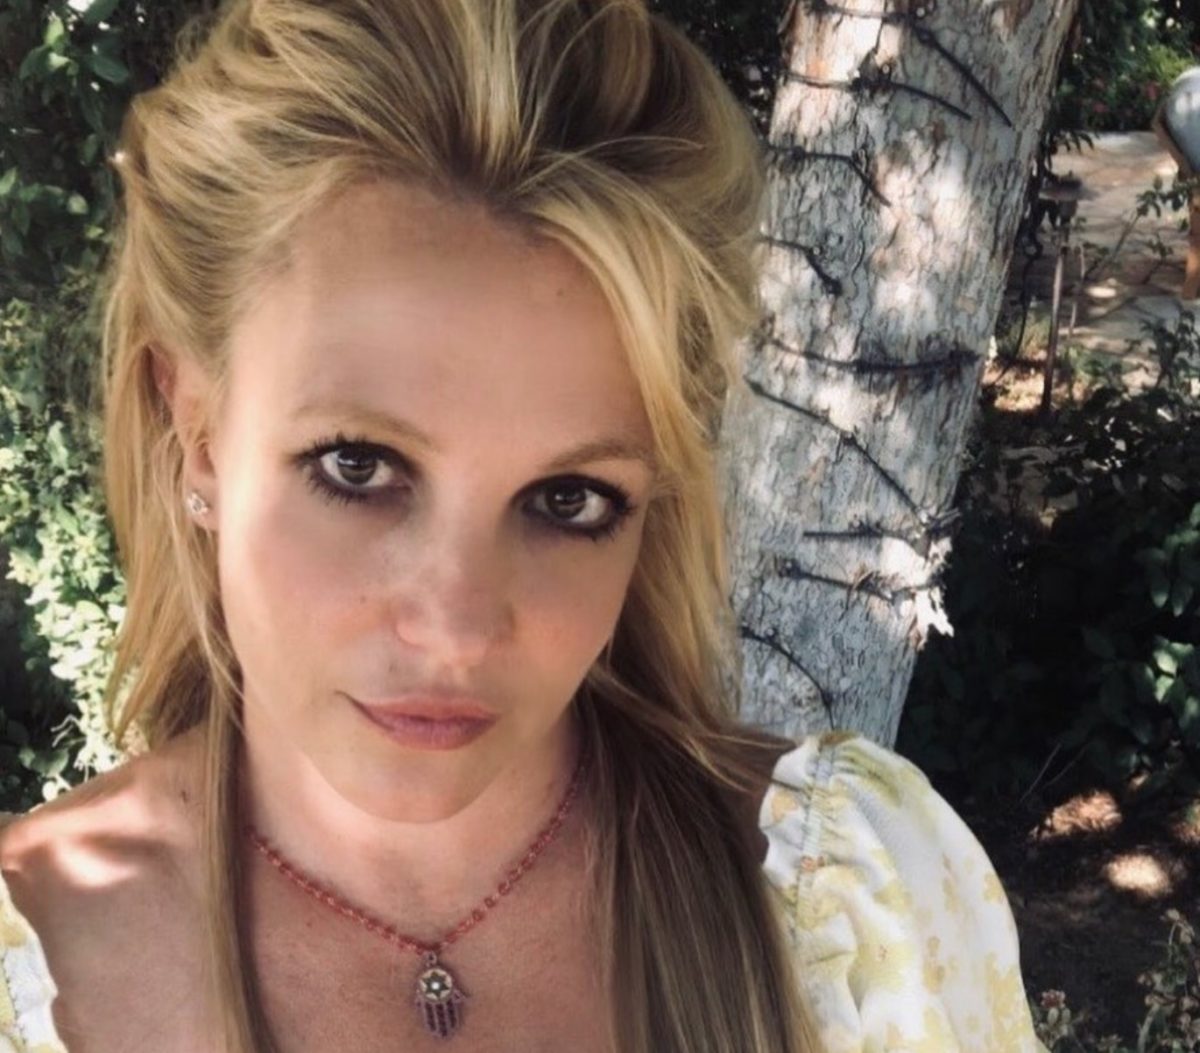 britney spears father fights to manage conservatorship, wins